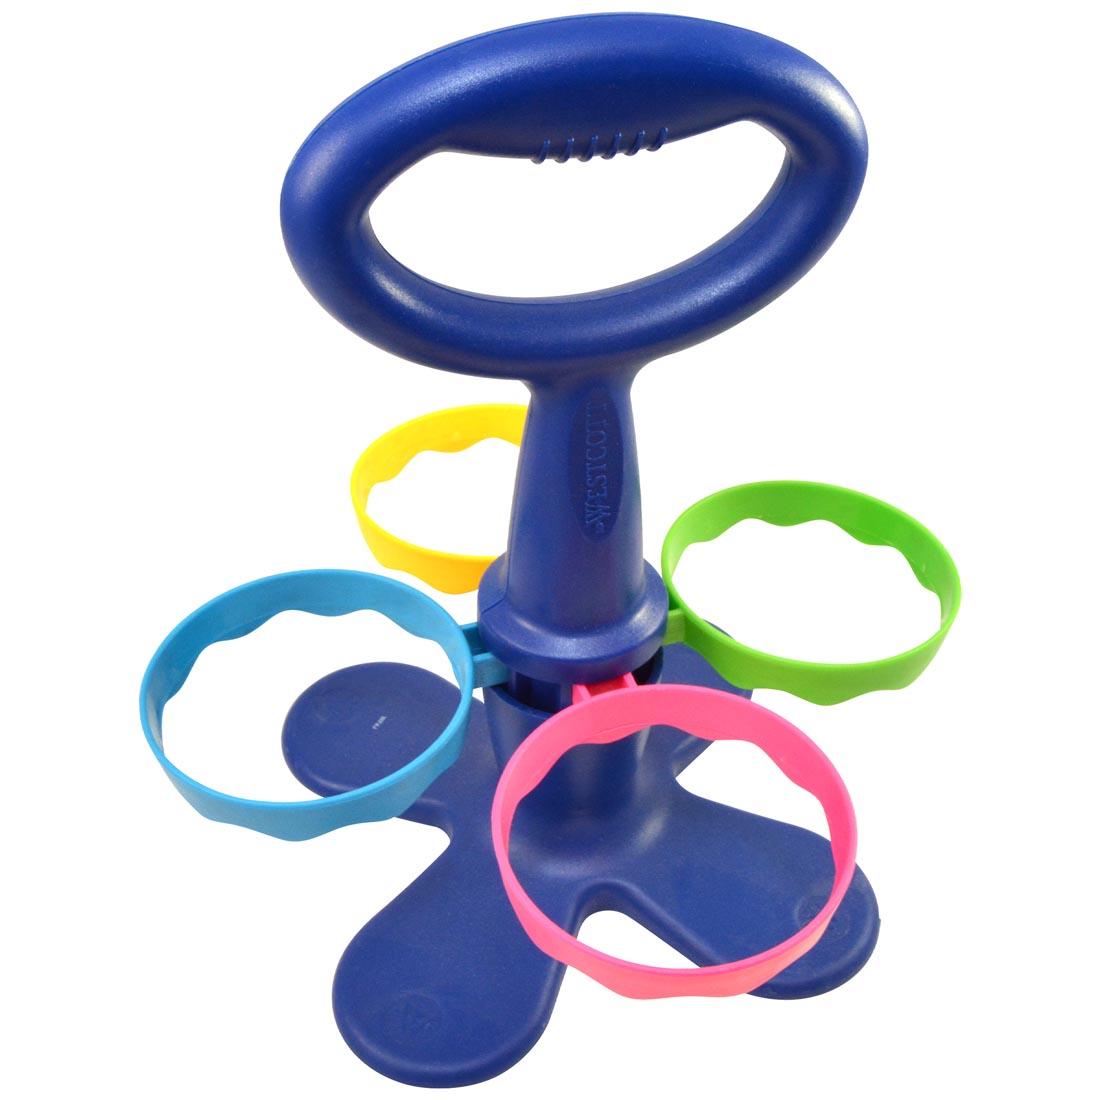 blue caddy with 4 rings for holding cups or kids' scissors